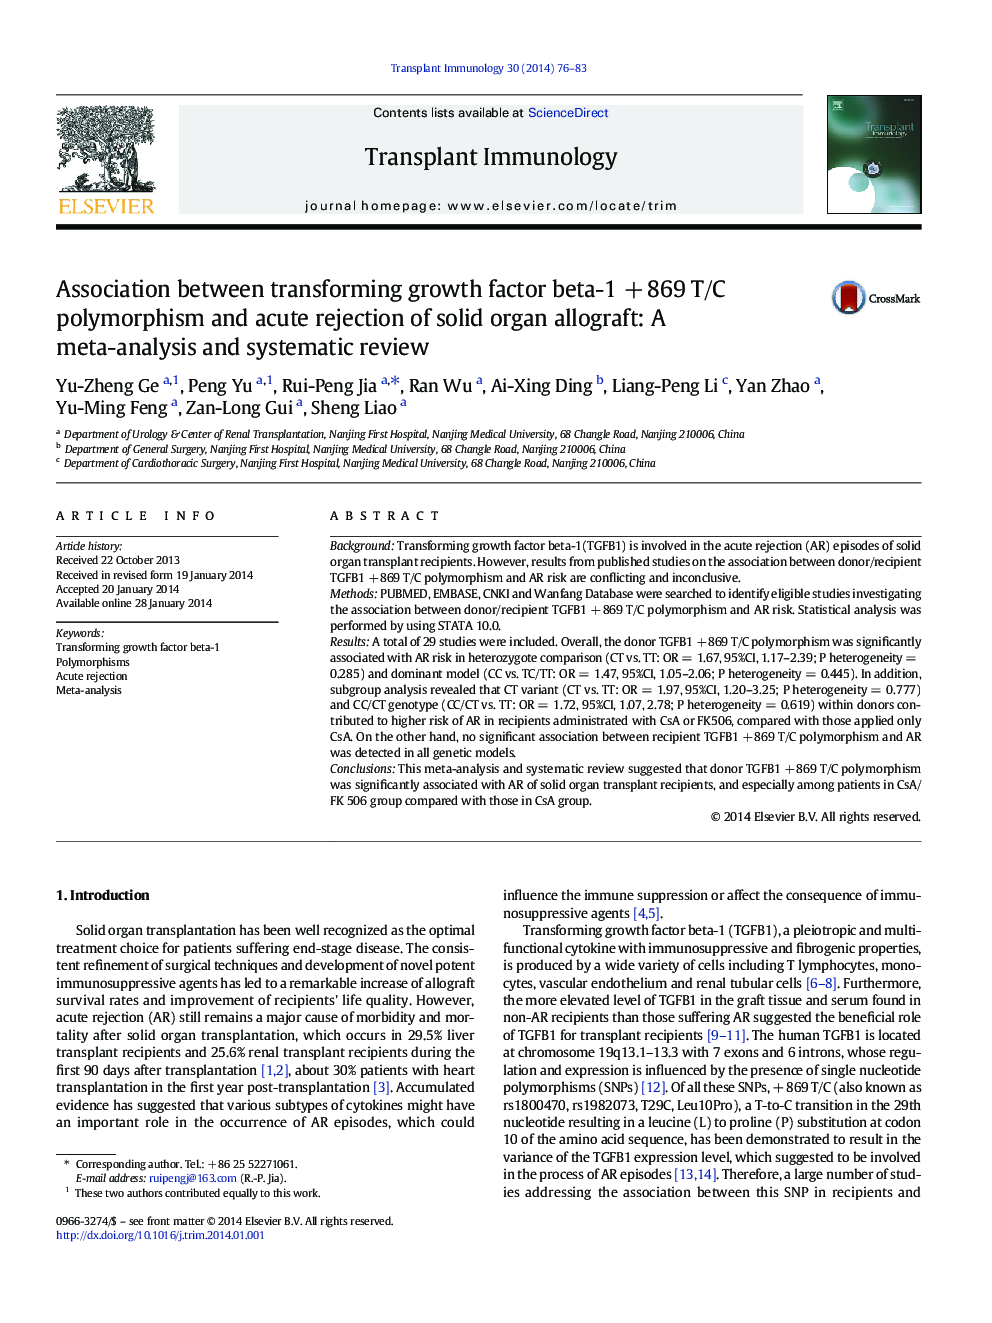 Association between transforming growth factor beta-1 + 869 T/C polymorphism and acute rejection of solid organ allograft: A meta-analysis and systematic review